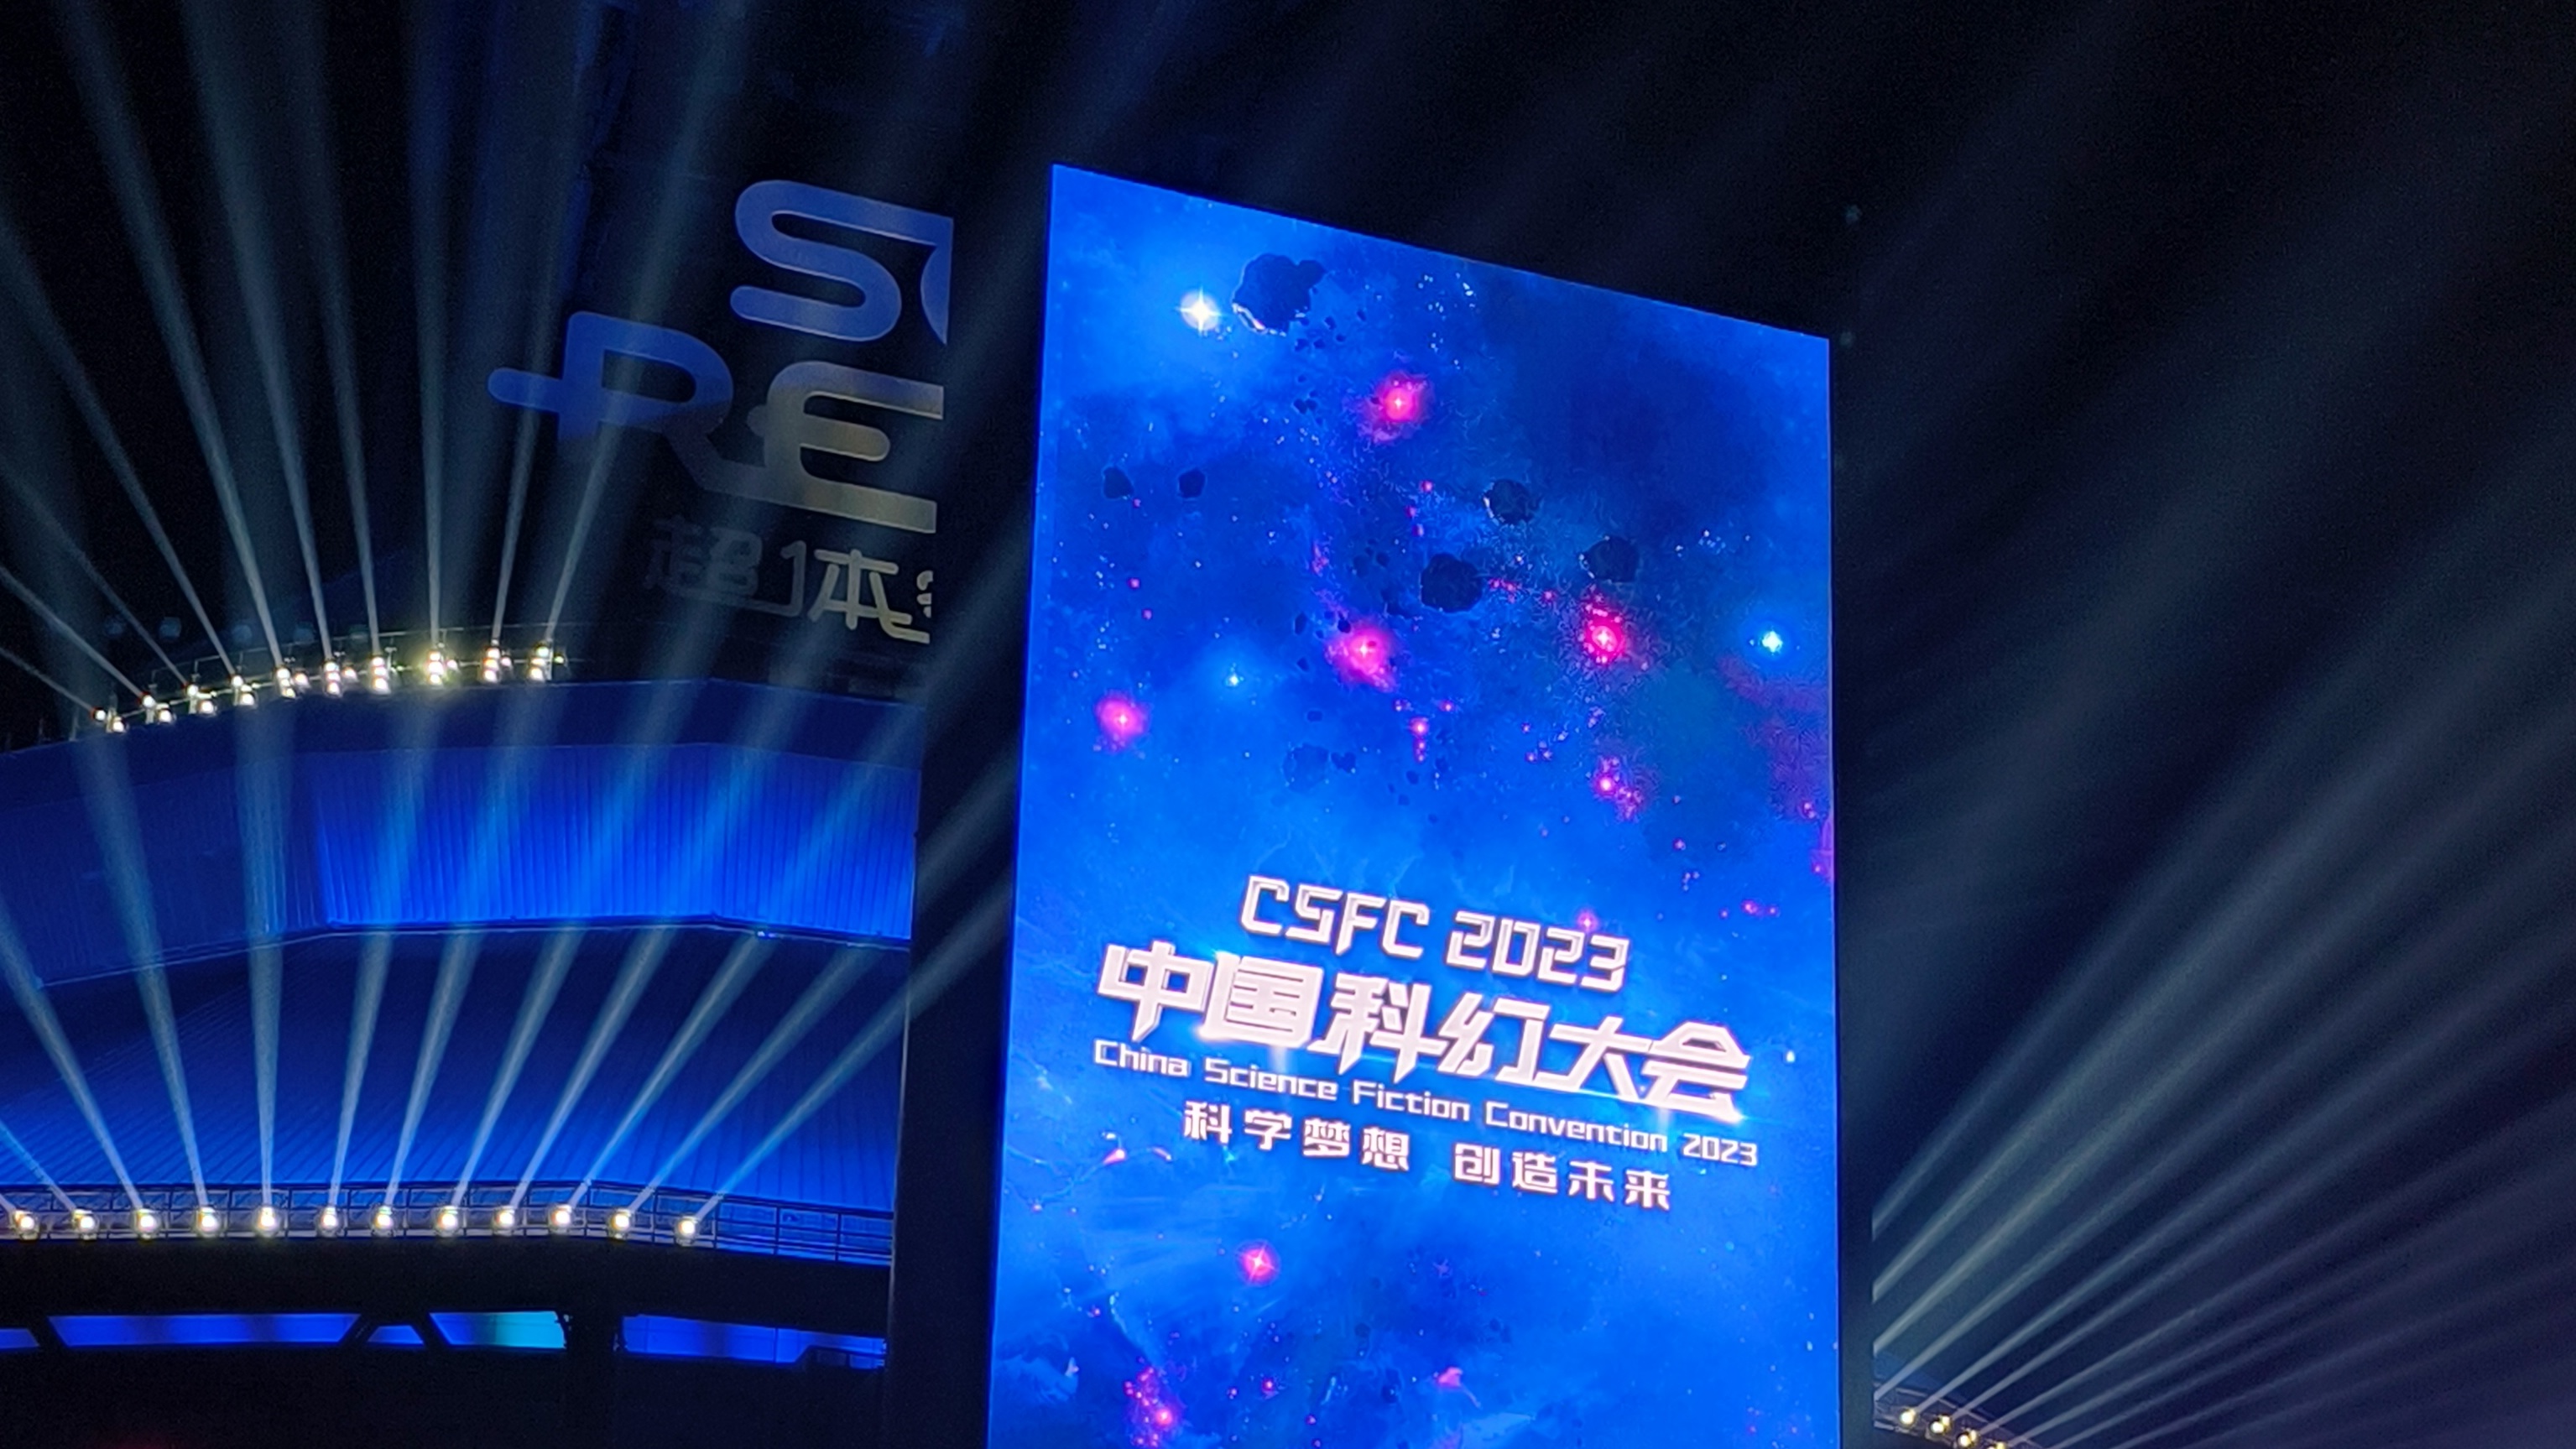 2023 China Science Fiction Convention (CSFC) was held in the Shougang Industrial Park in Beijing, China./CGTN